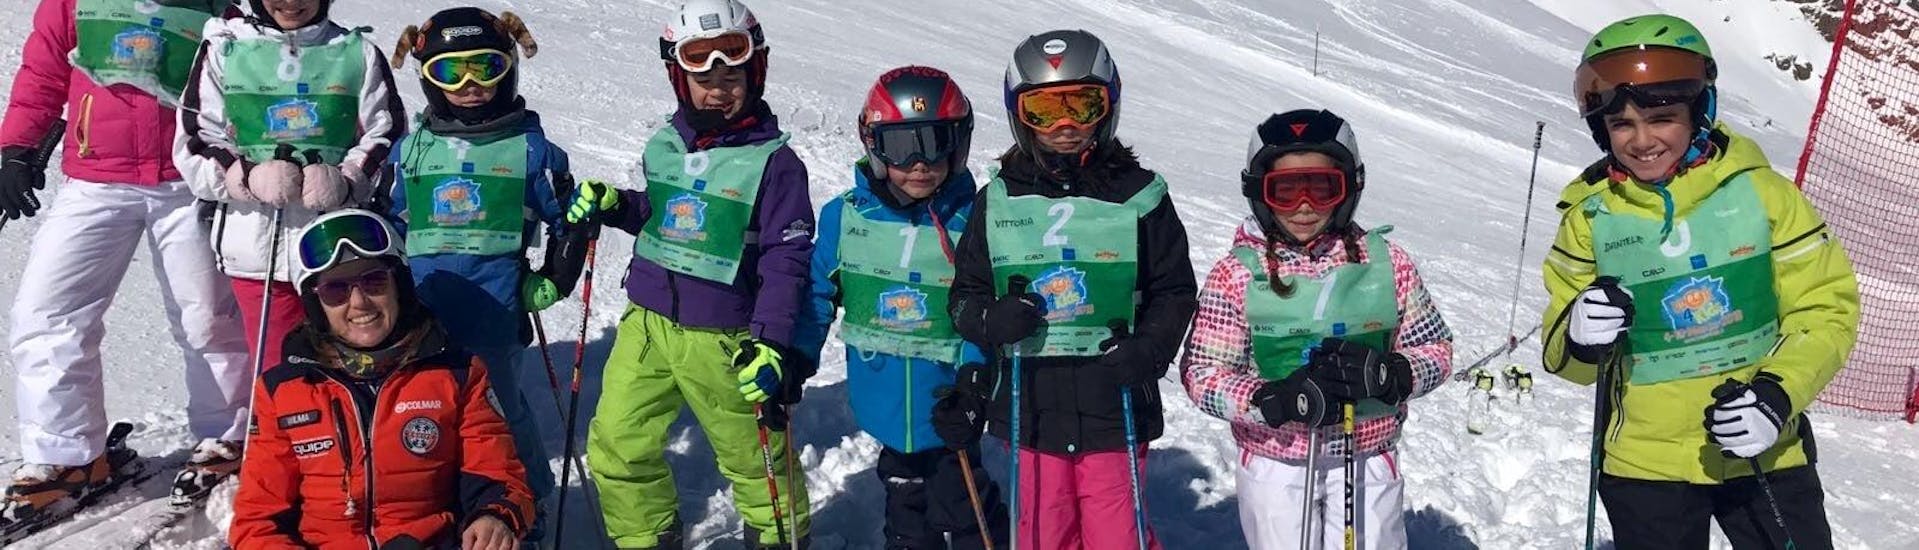 Kids together on the slopes of Falcade during one of the Kids Ski Lessons (4-12 y.) - Full Day.